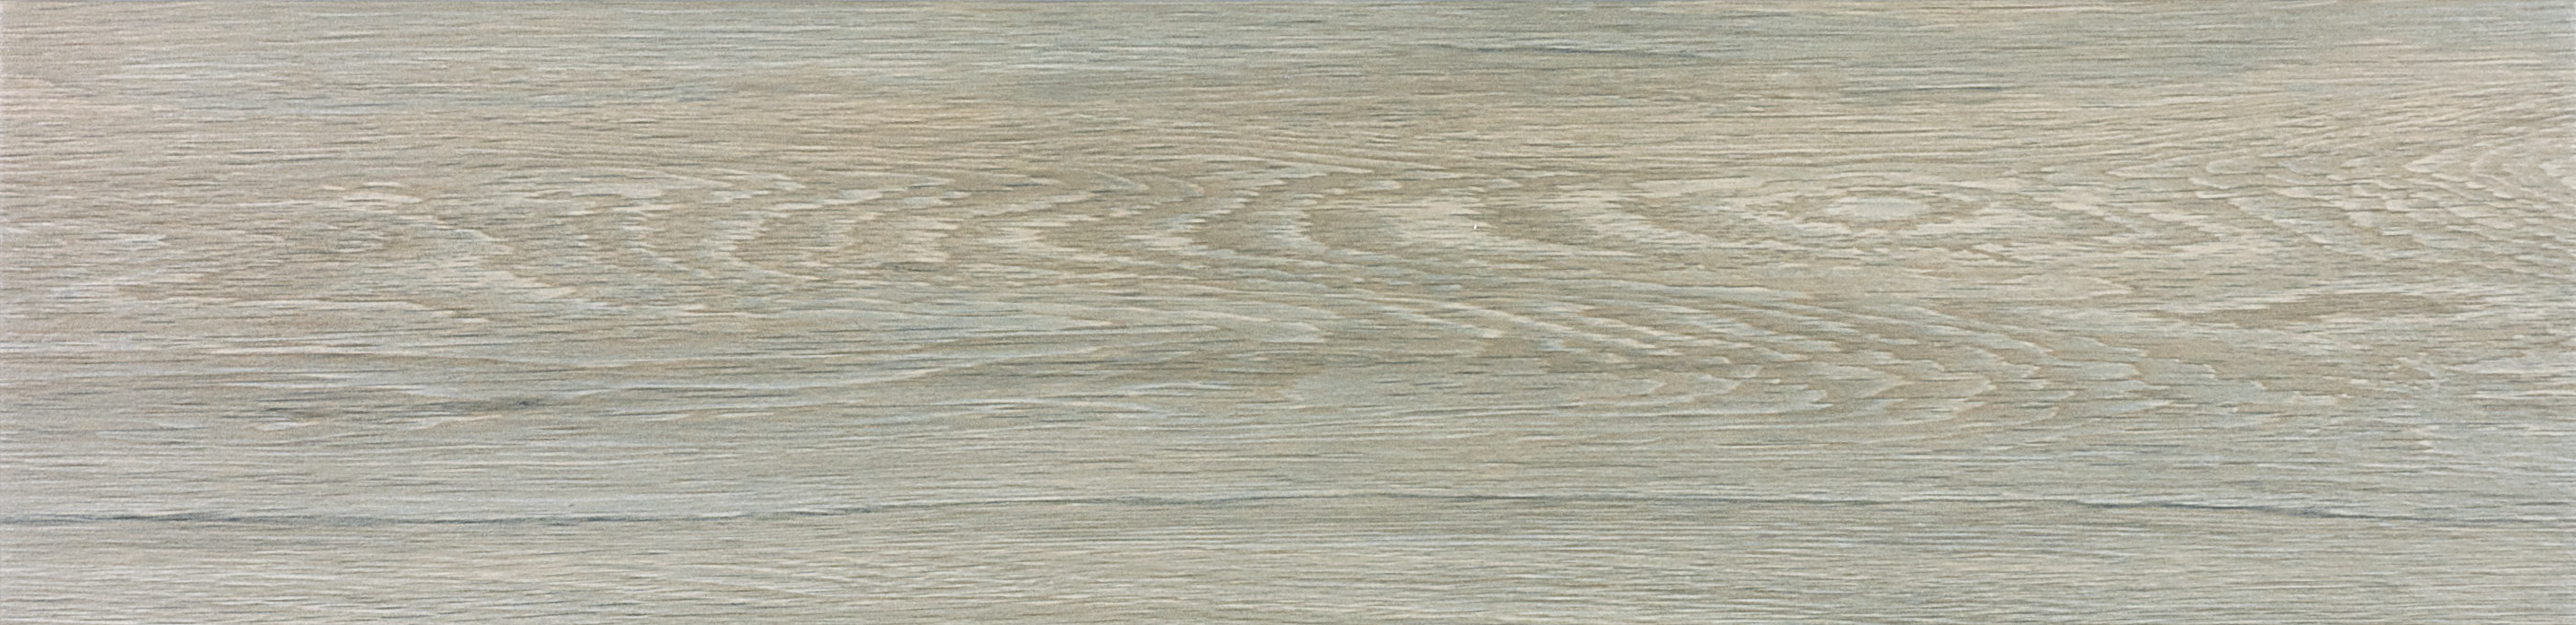 ash pattern glazed porcelain field tile from vintagewood anatolia collection distributed by surface group international matte finish pressed edge 6x24 rectangle shape